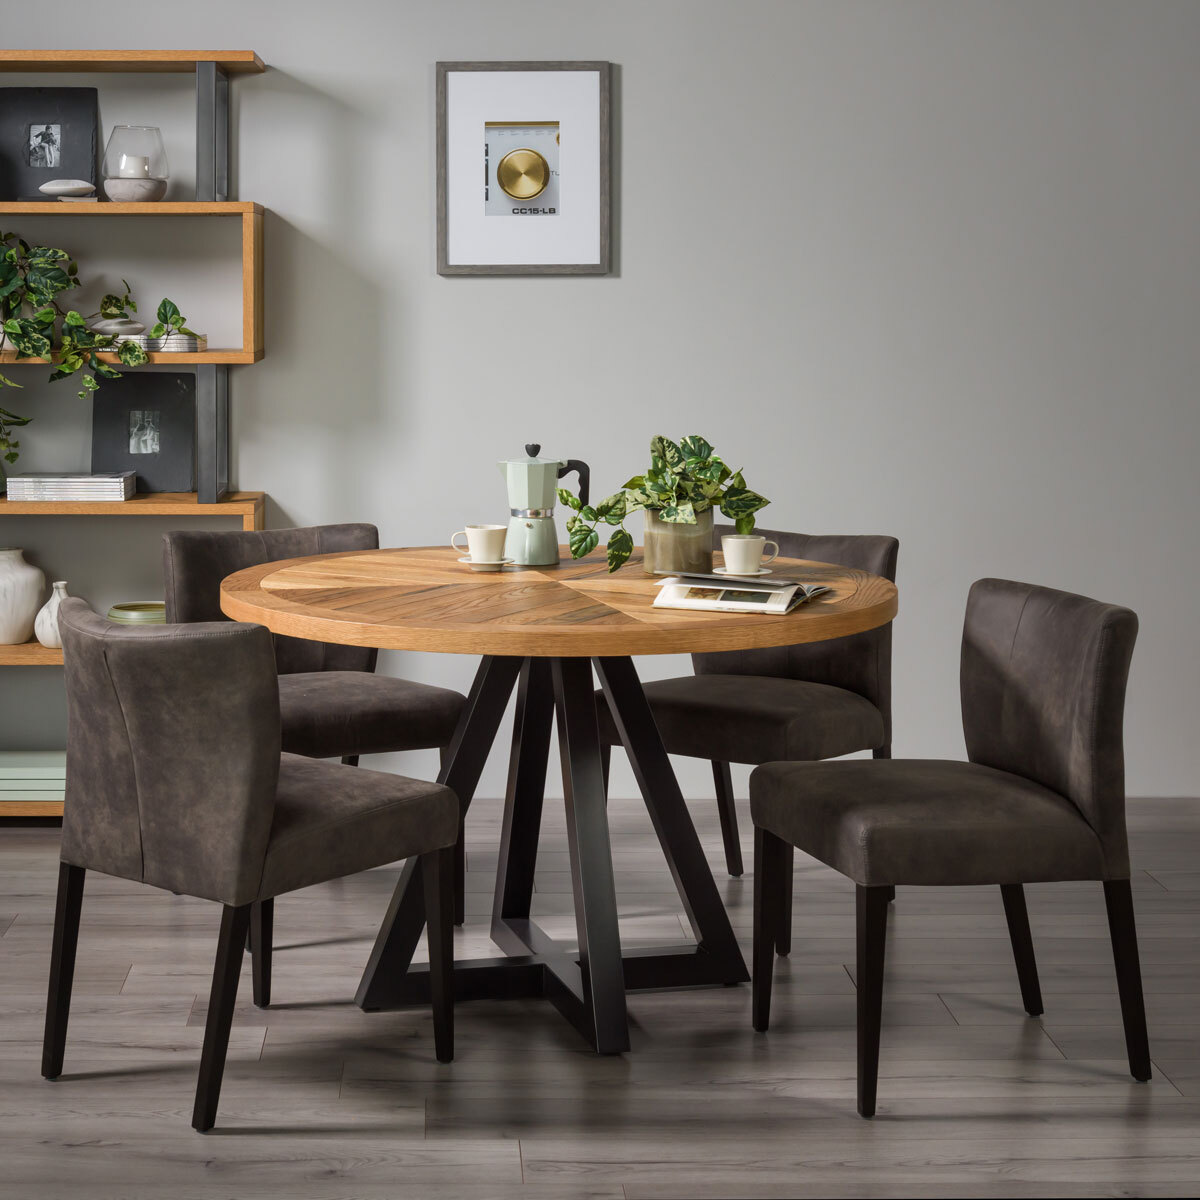 Chevron Rustic Oak Round Dining Table, Round Dining Tables And Chairs Uk